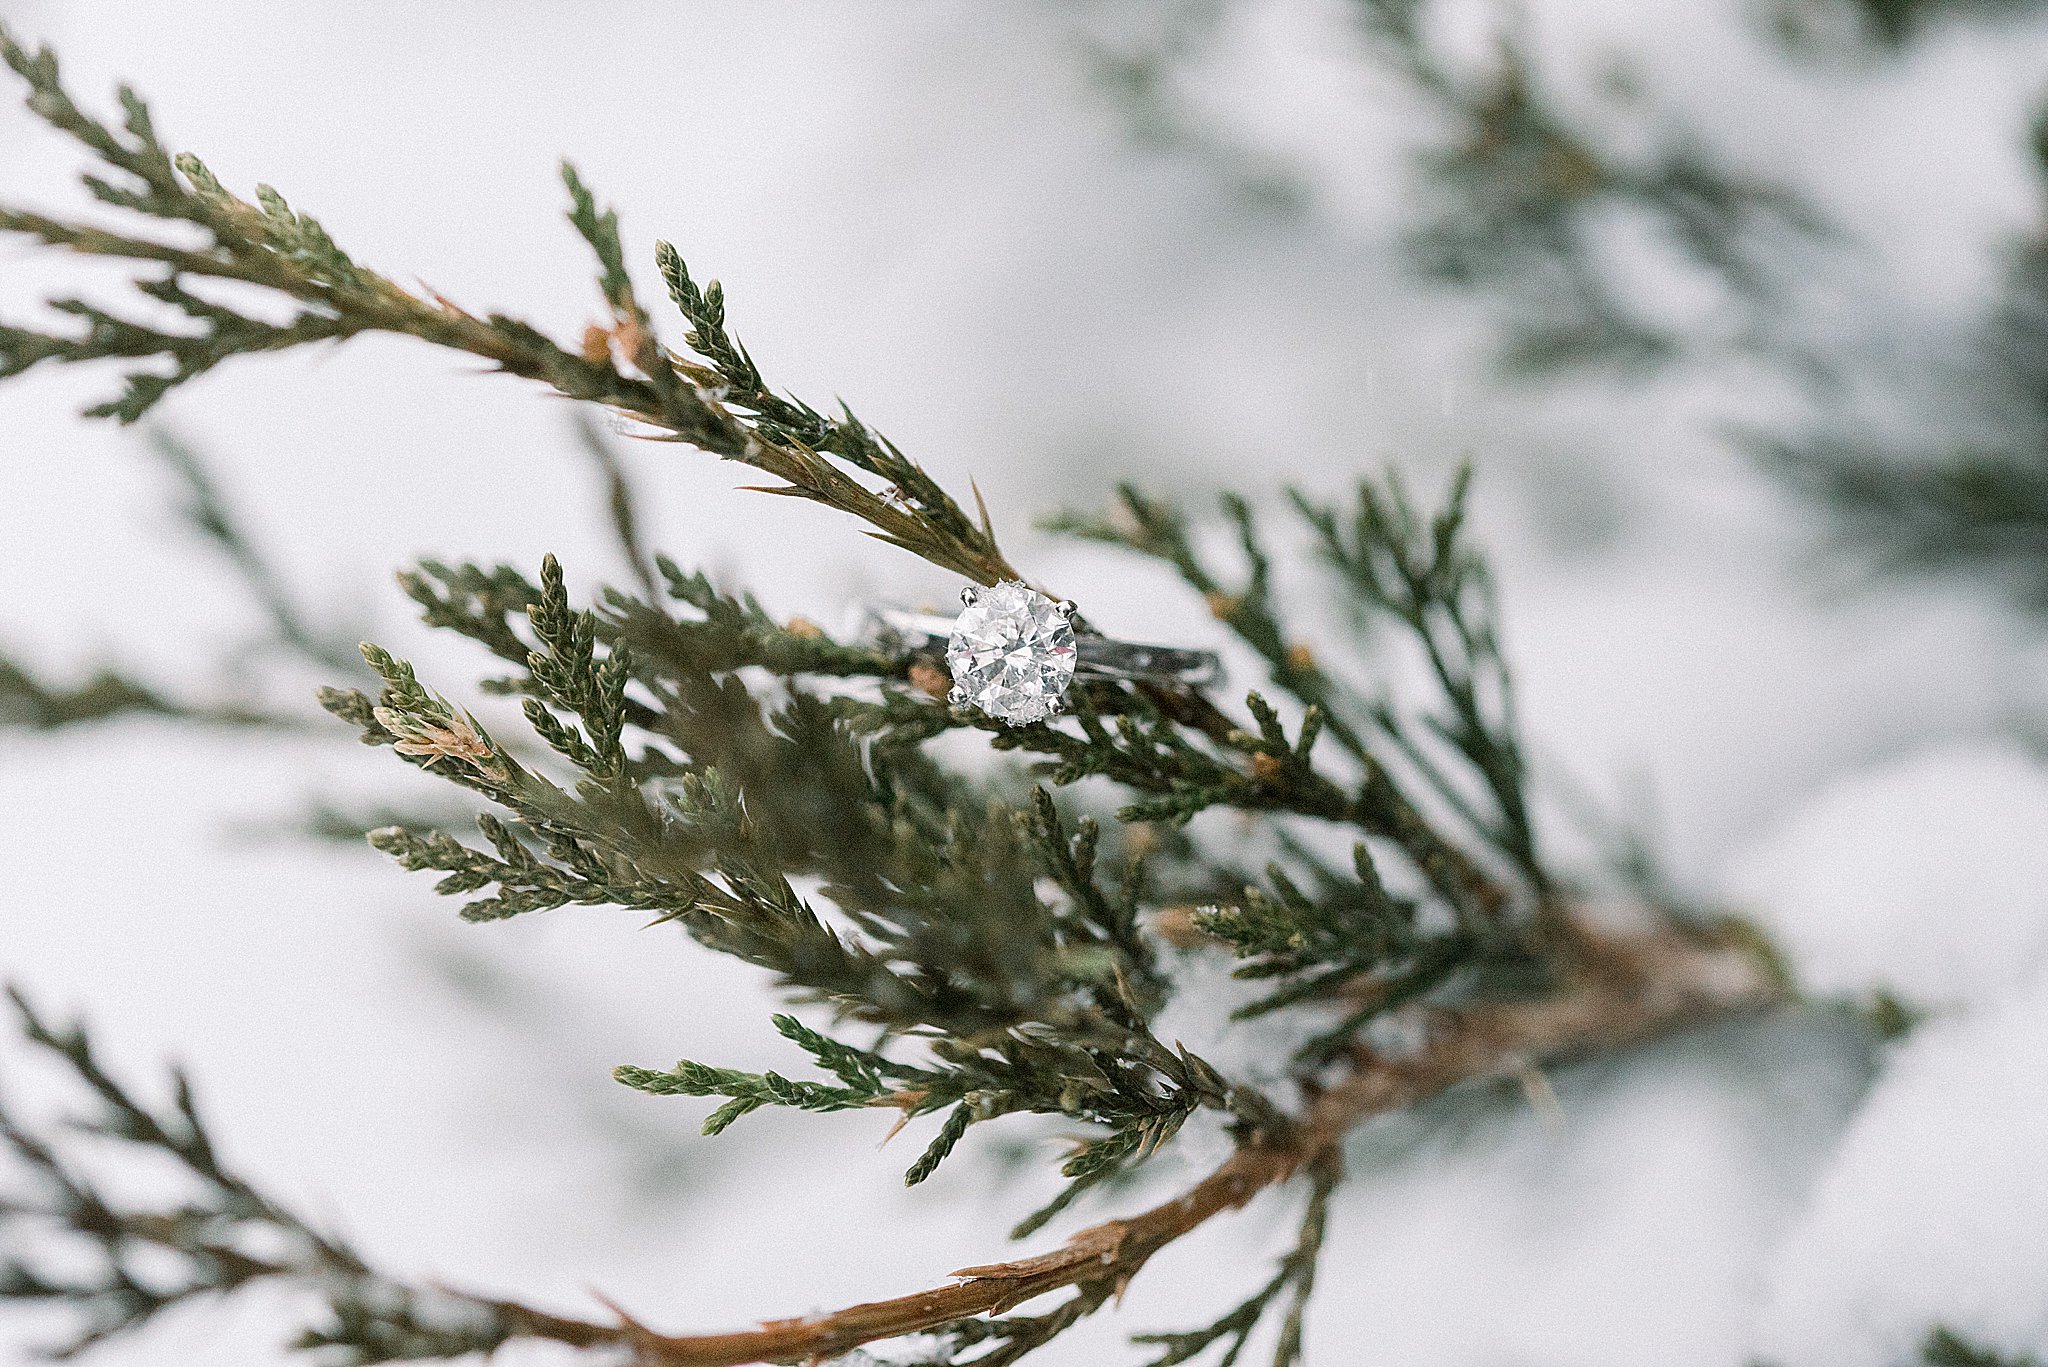 Engagement Ring in Snow